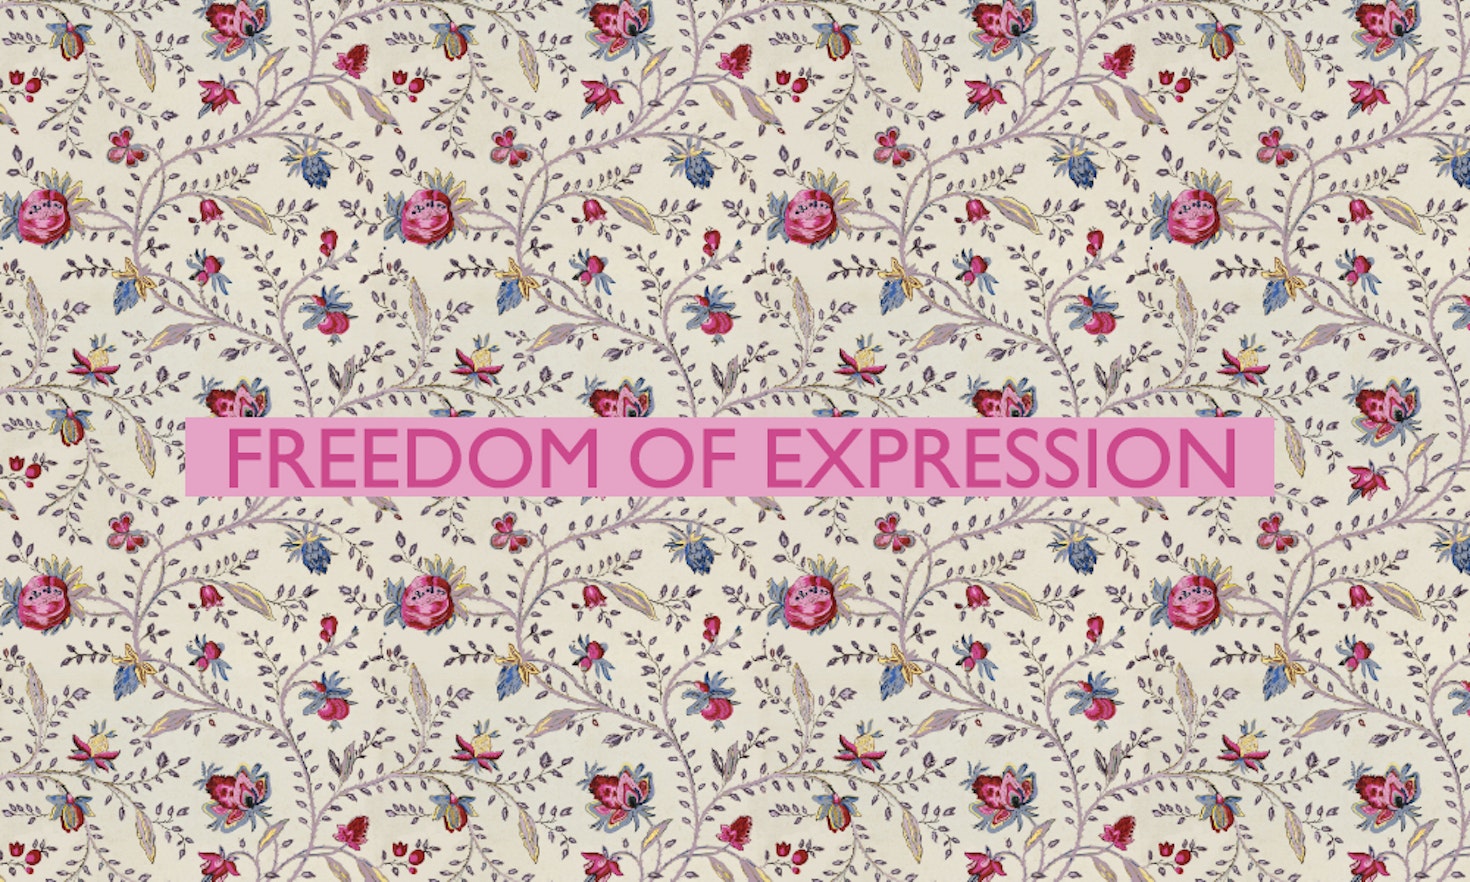 The 11th of all EU-r rights: freedom of expression and how the Charter contributes